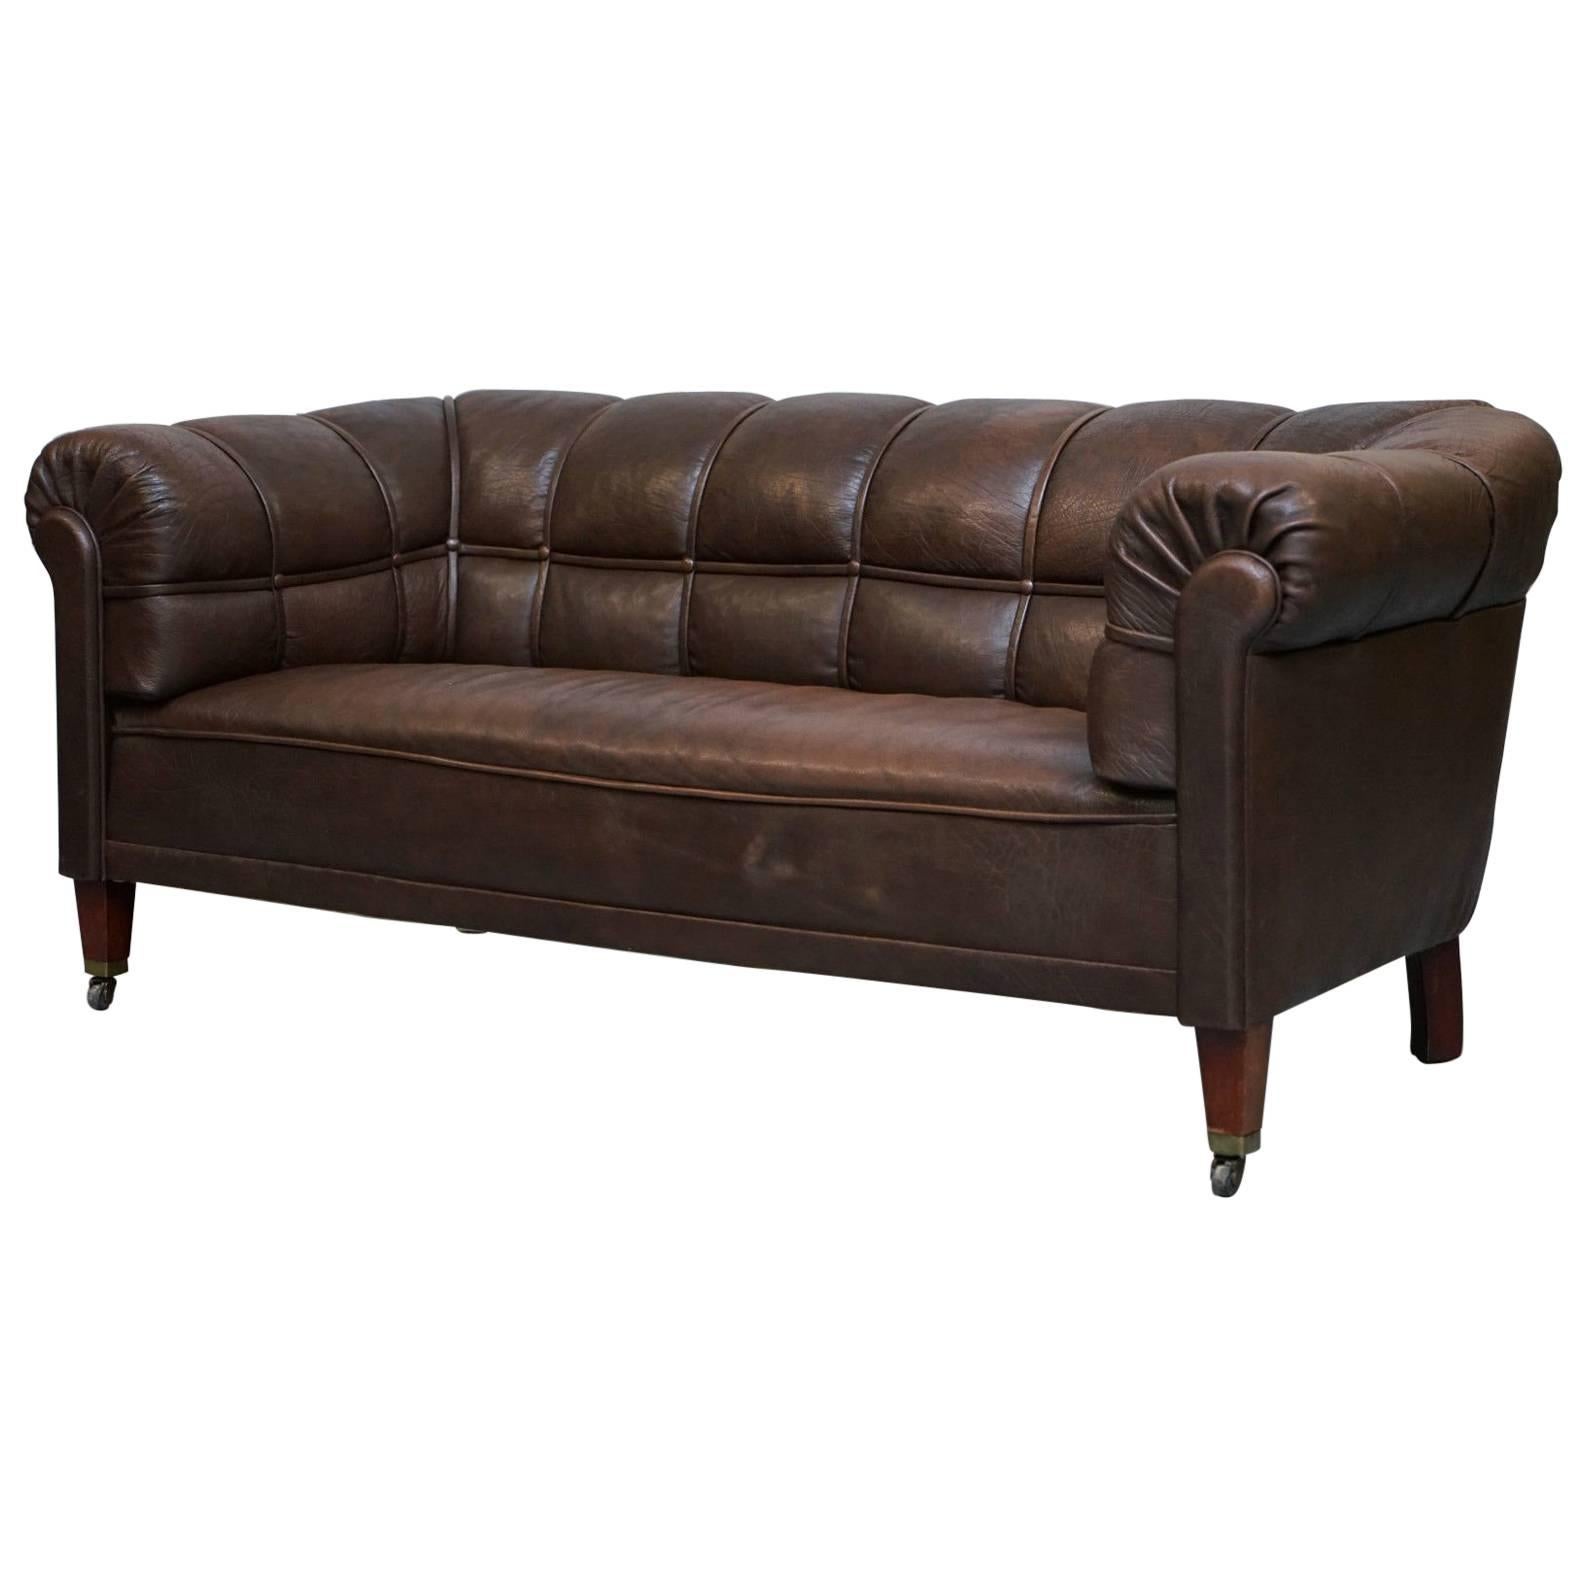 Victorian circa 1860 Swedish Brown Leather Chesterfield Club Sofa Fully Sprung For Sale